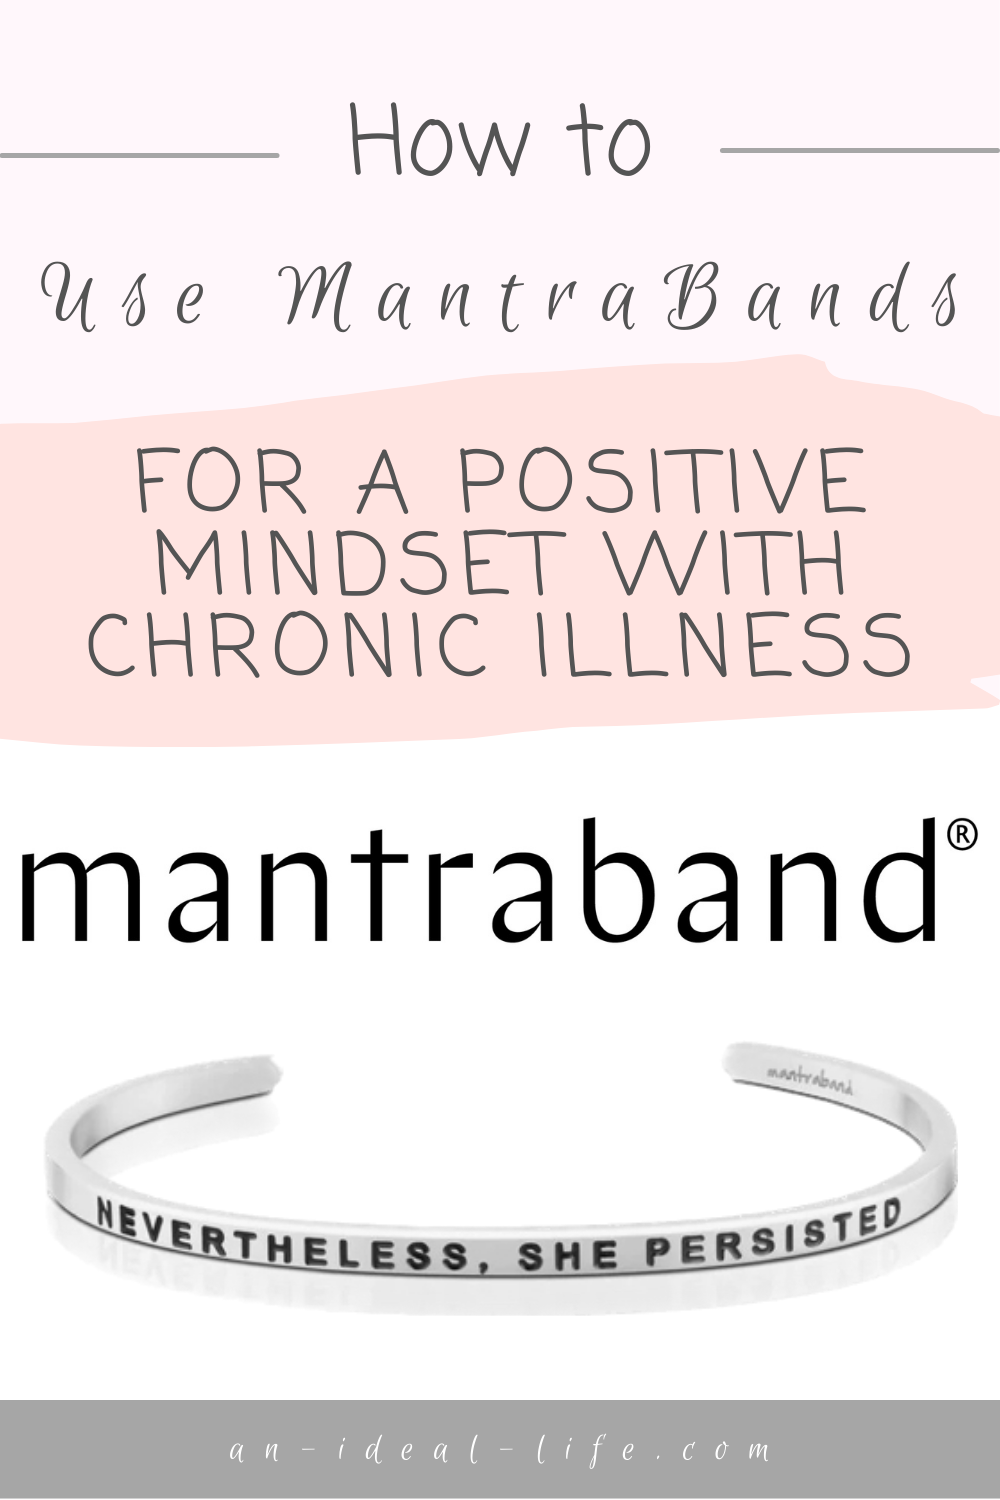 How to Use MantraBands for a Positive Mindset With Chronic Illness